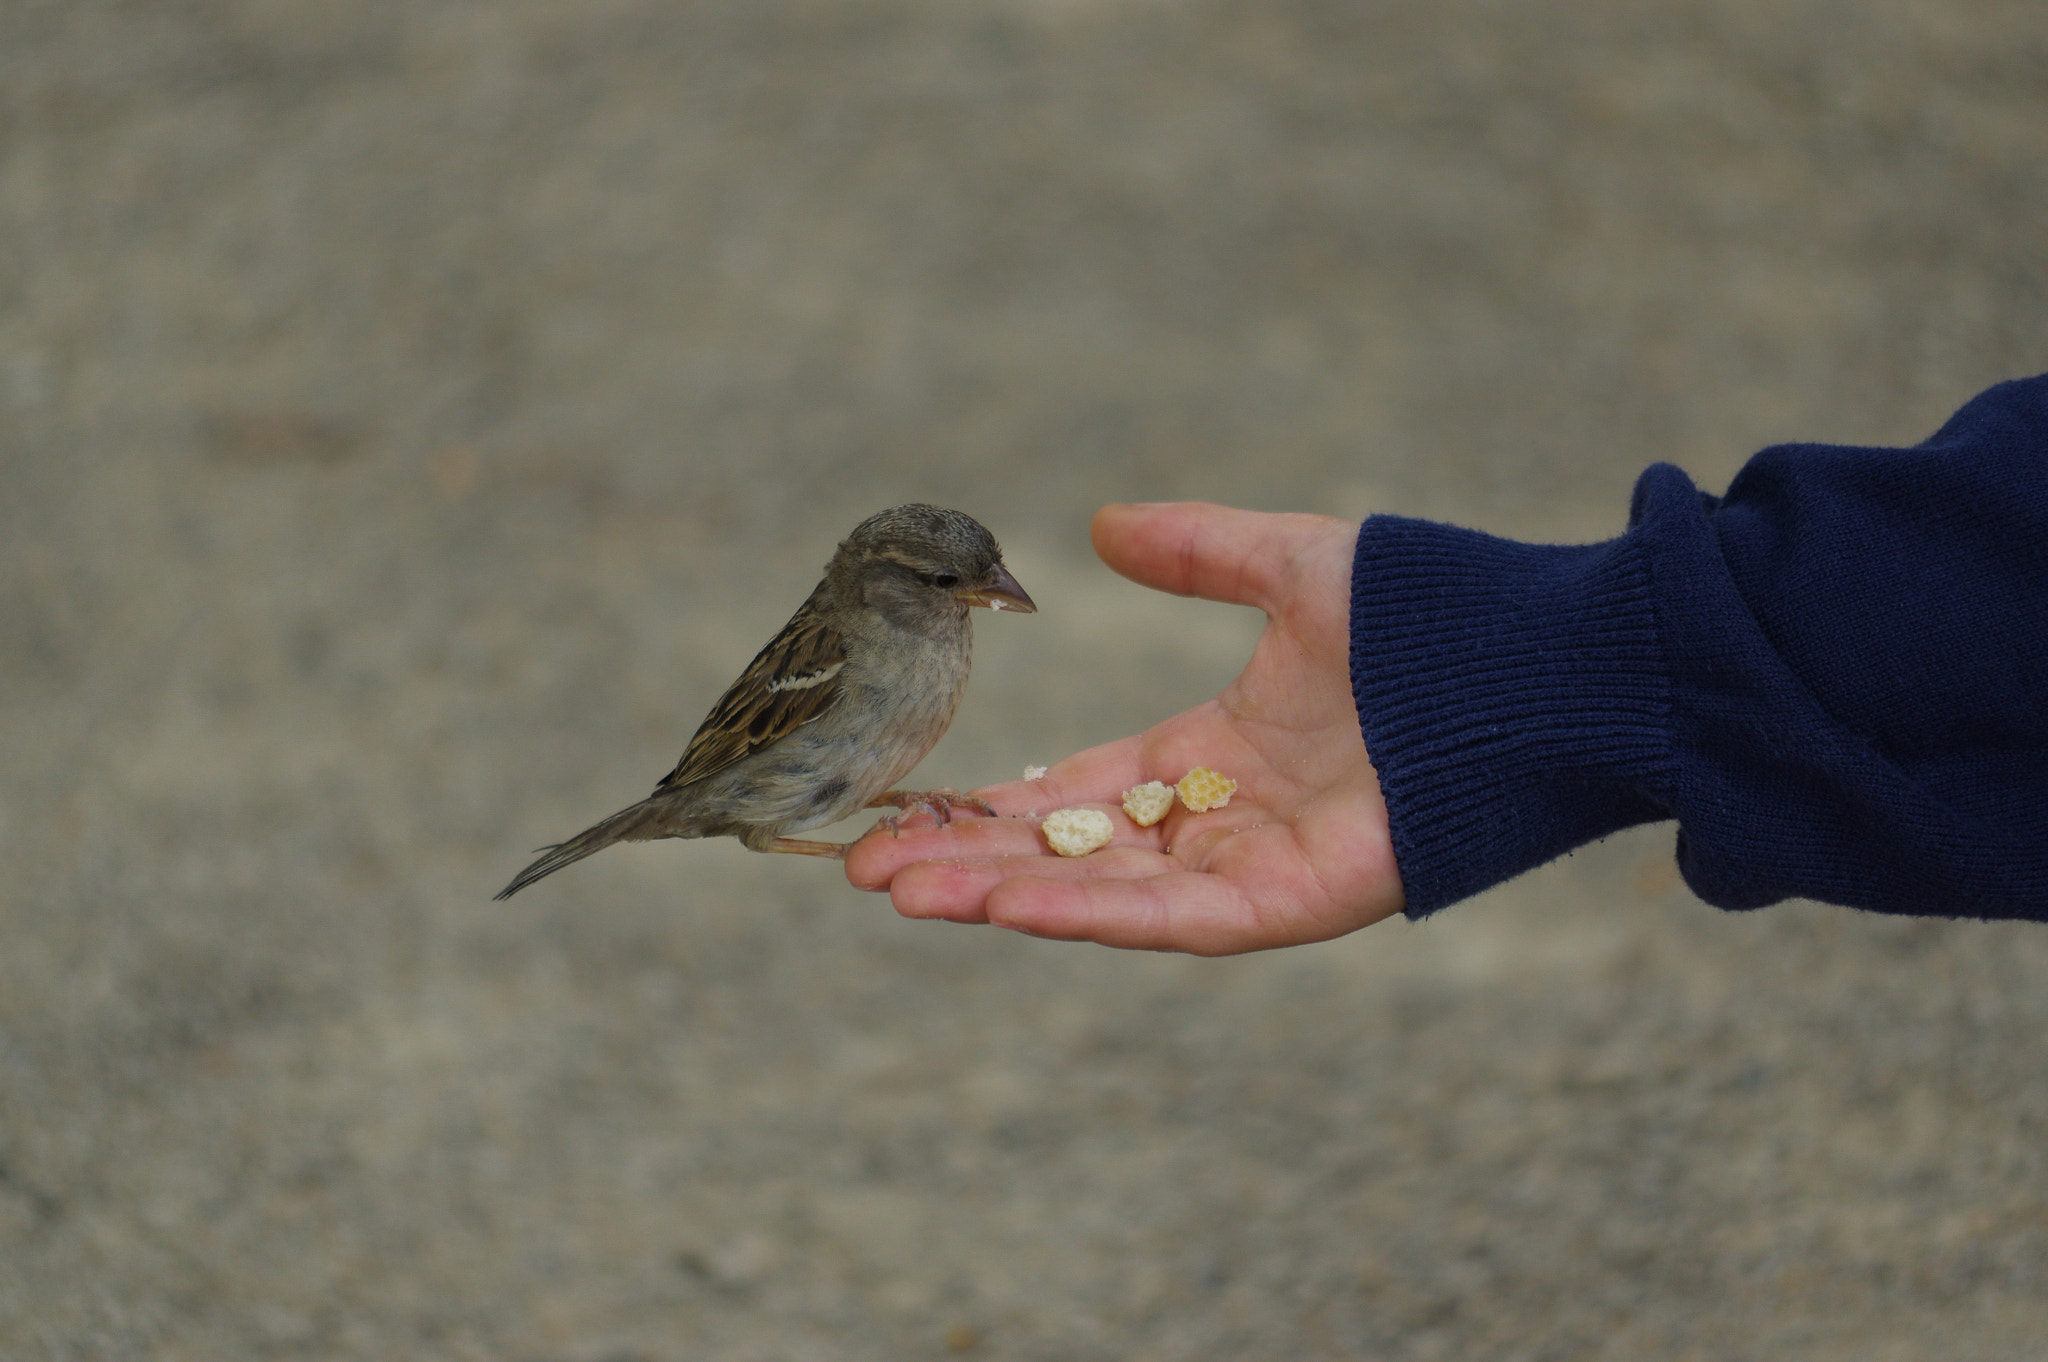 Pentax K-3 sample photo. Sparrow bird eating bread from outstretched hand photography